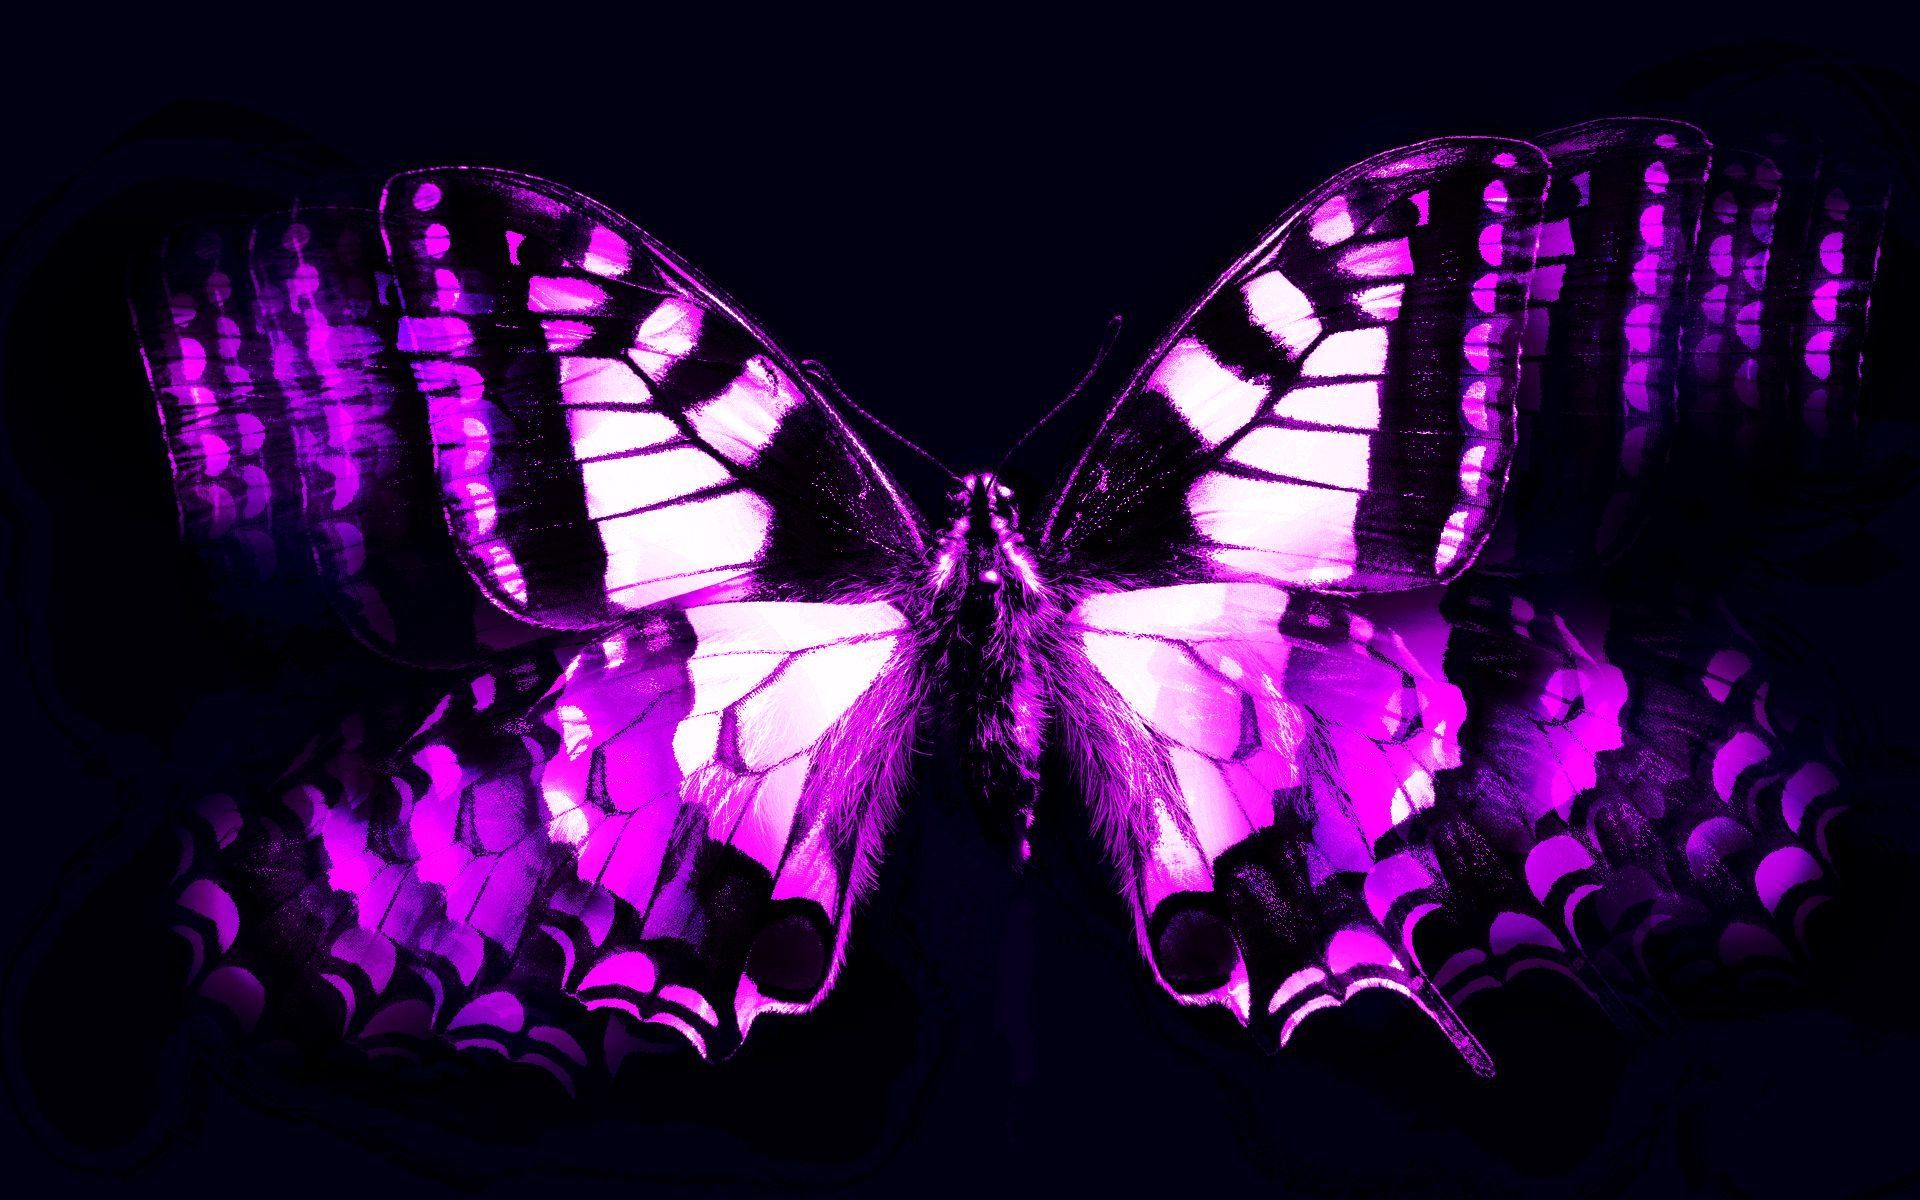 985243 Fresh Animated Butterfly Wallpaper For Mobile Dark Purple Purple Butterfly HD Wallpaper